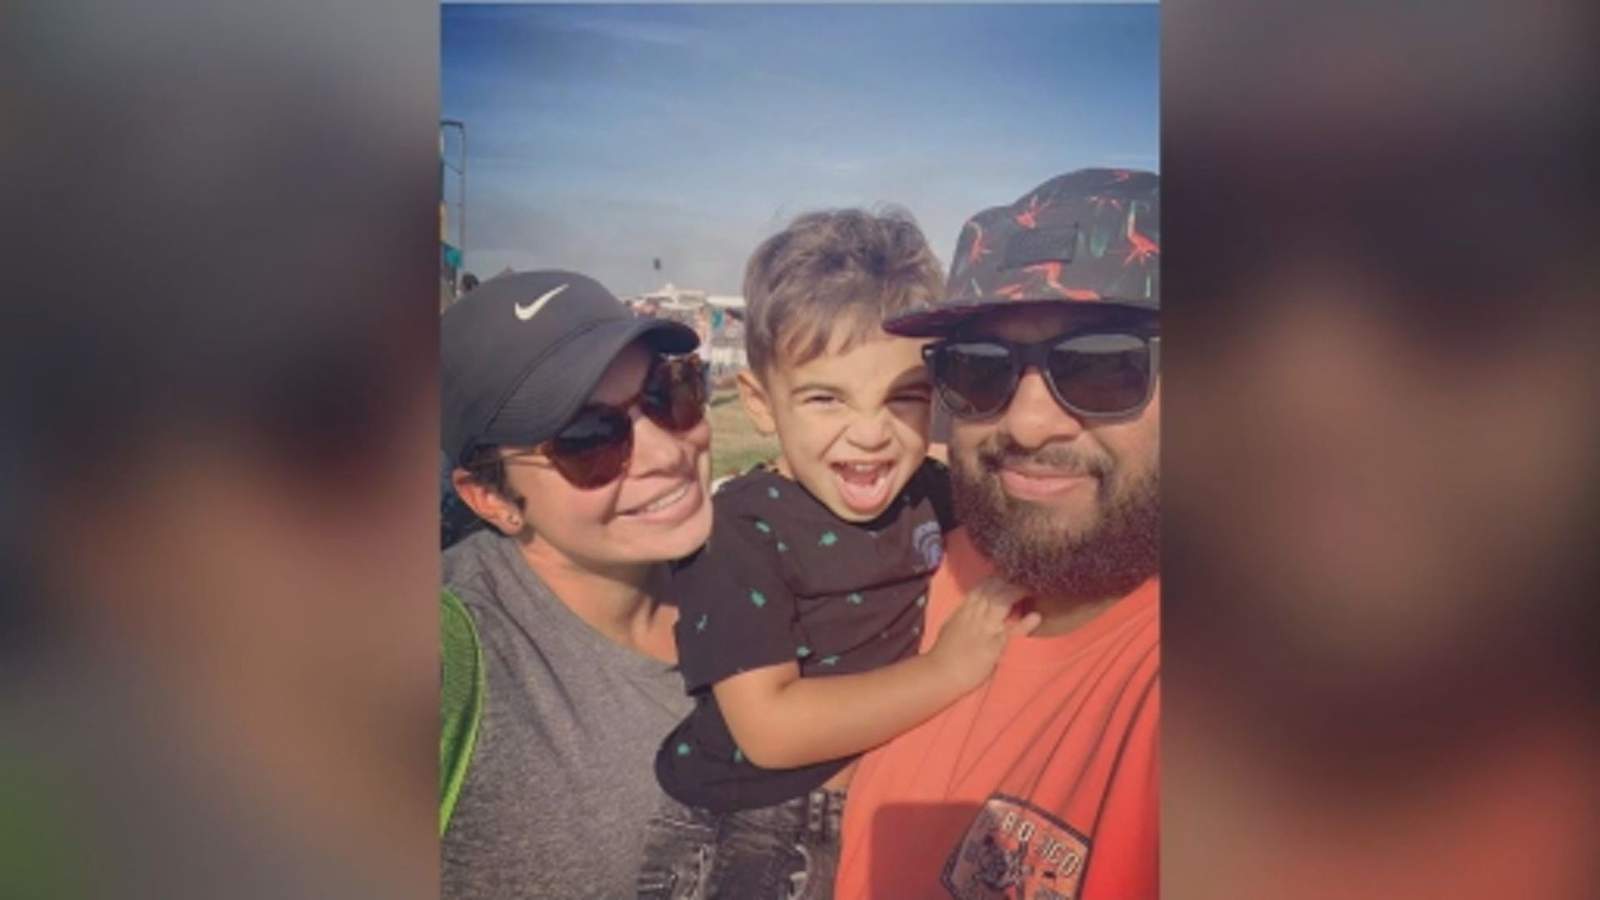 ‘We have nothing’: Packed moving truck stolen from family that had just arrived in Houston from California